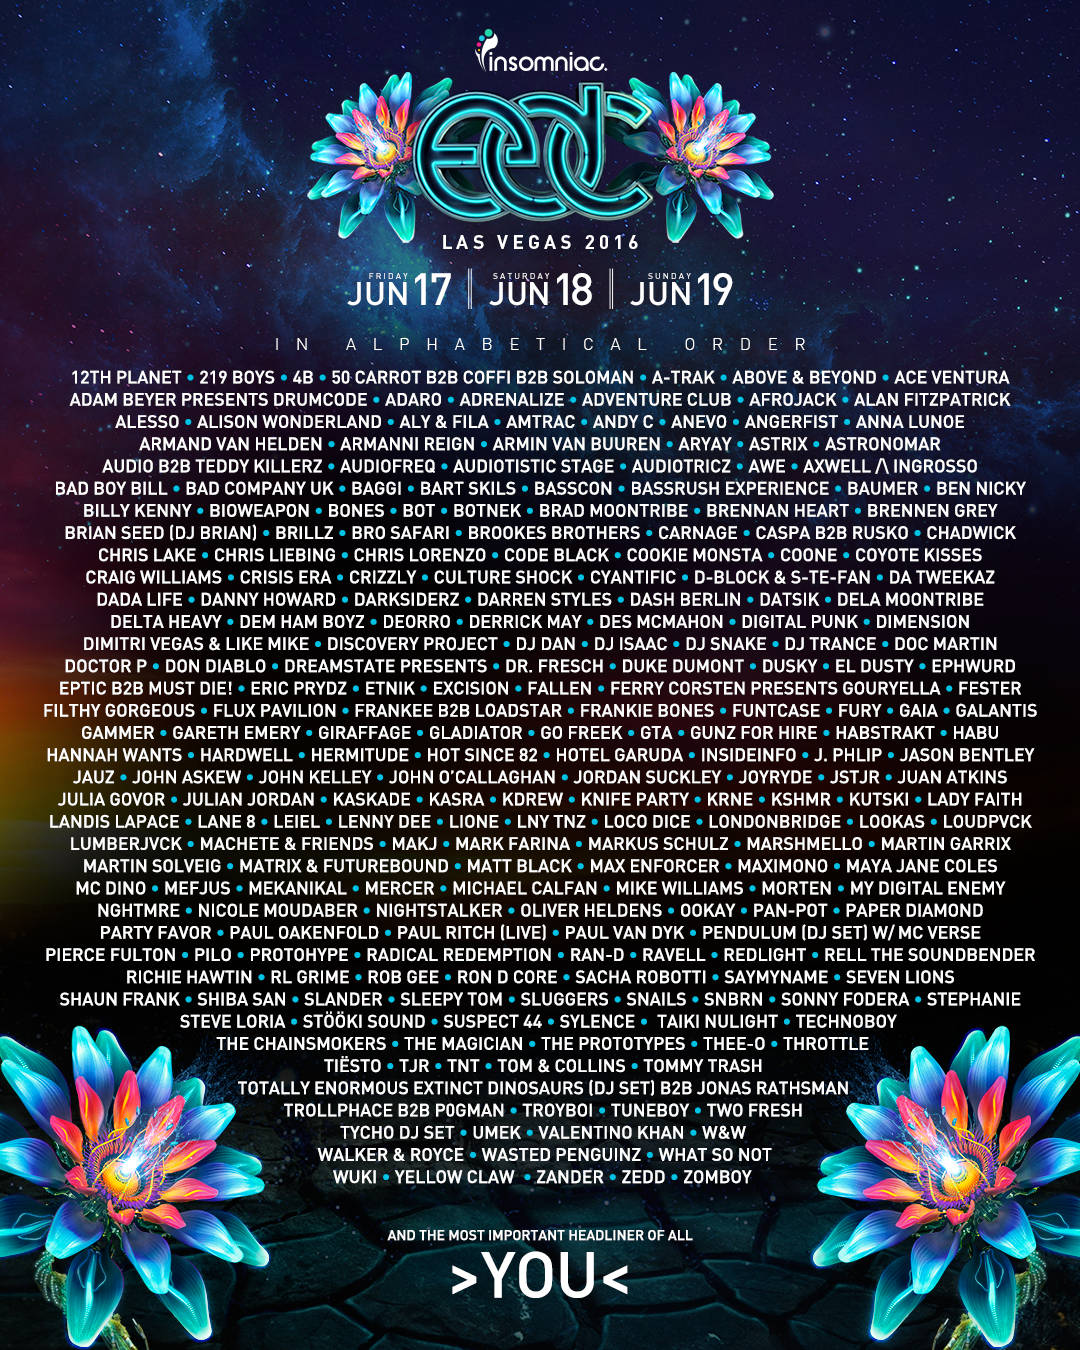 The Complete EDC Las Vegas 2016 Lineup Is Out | Your EDM